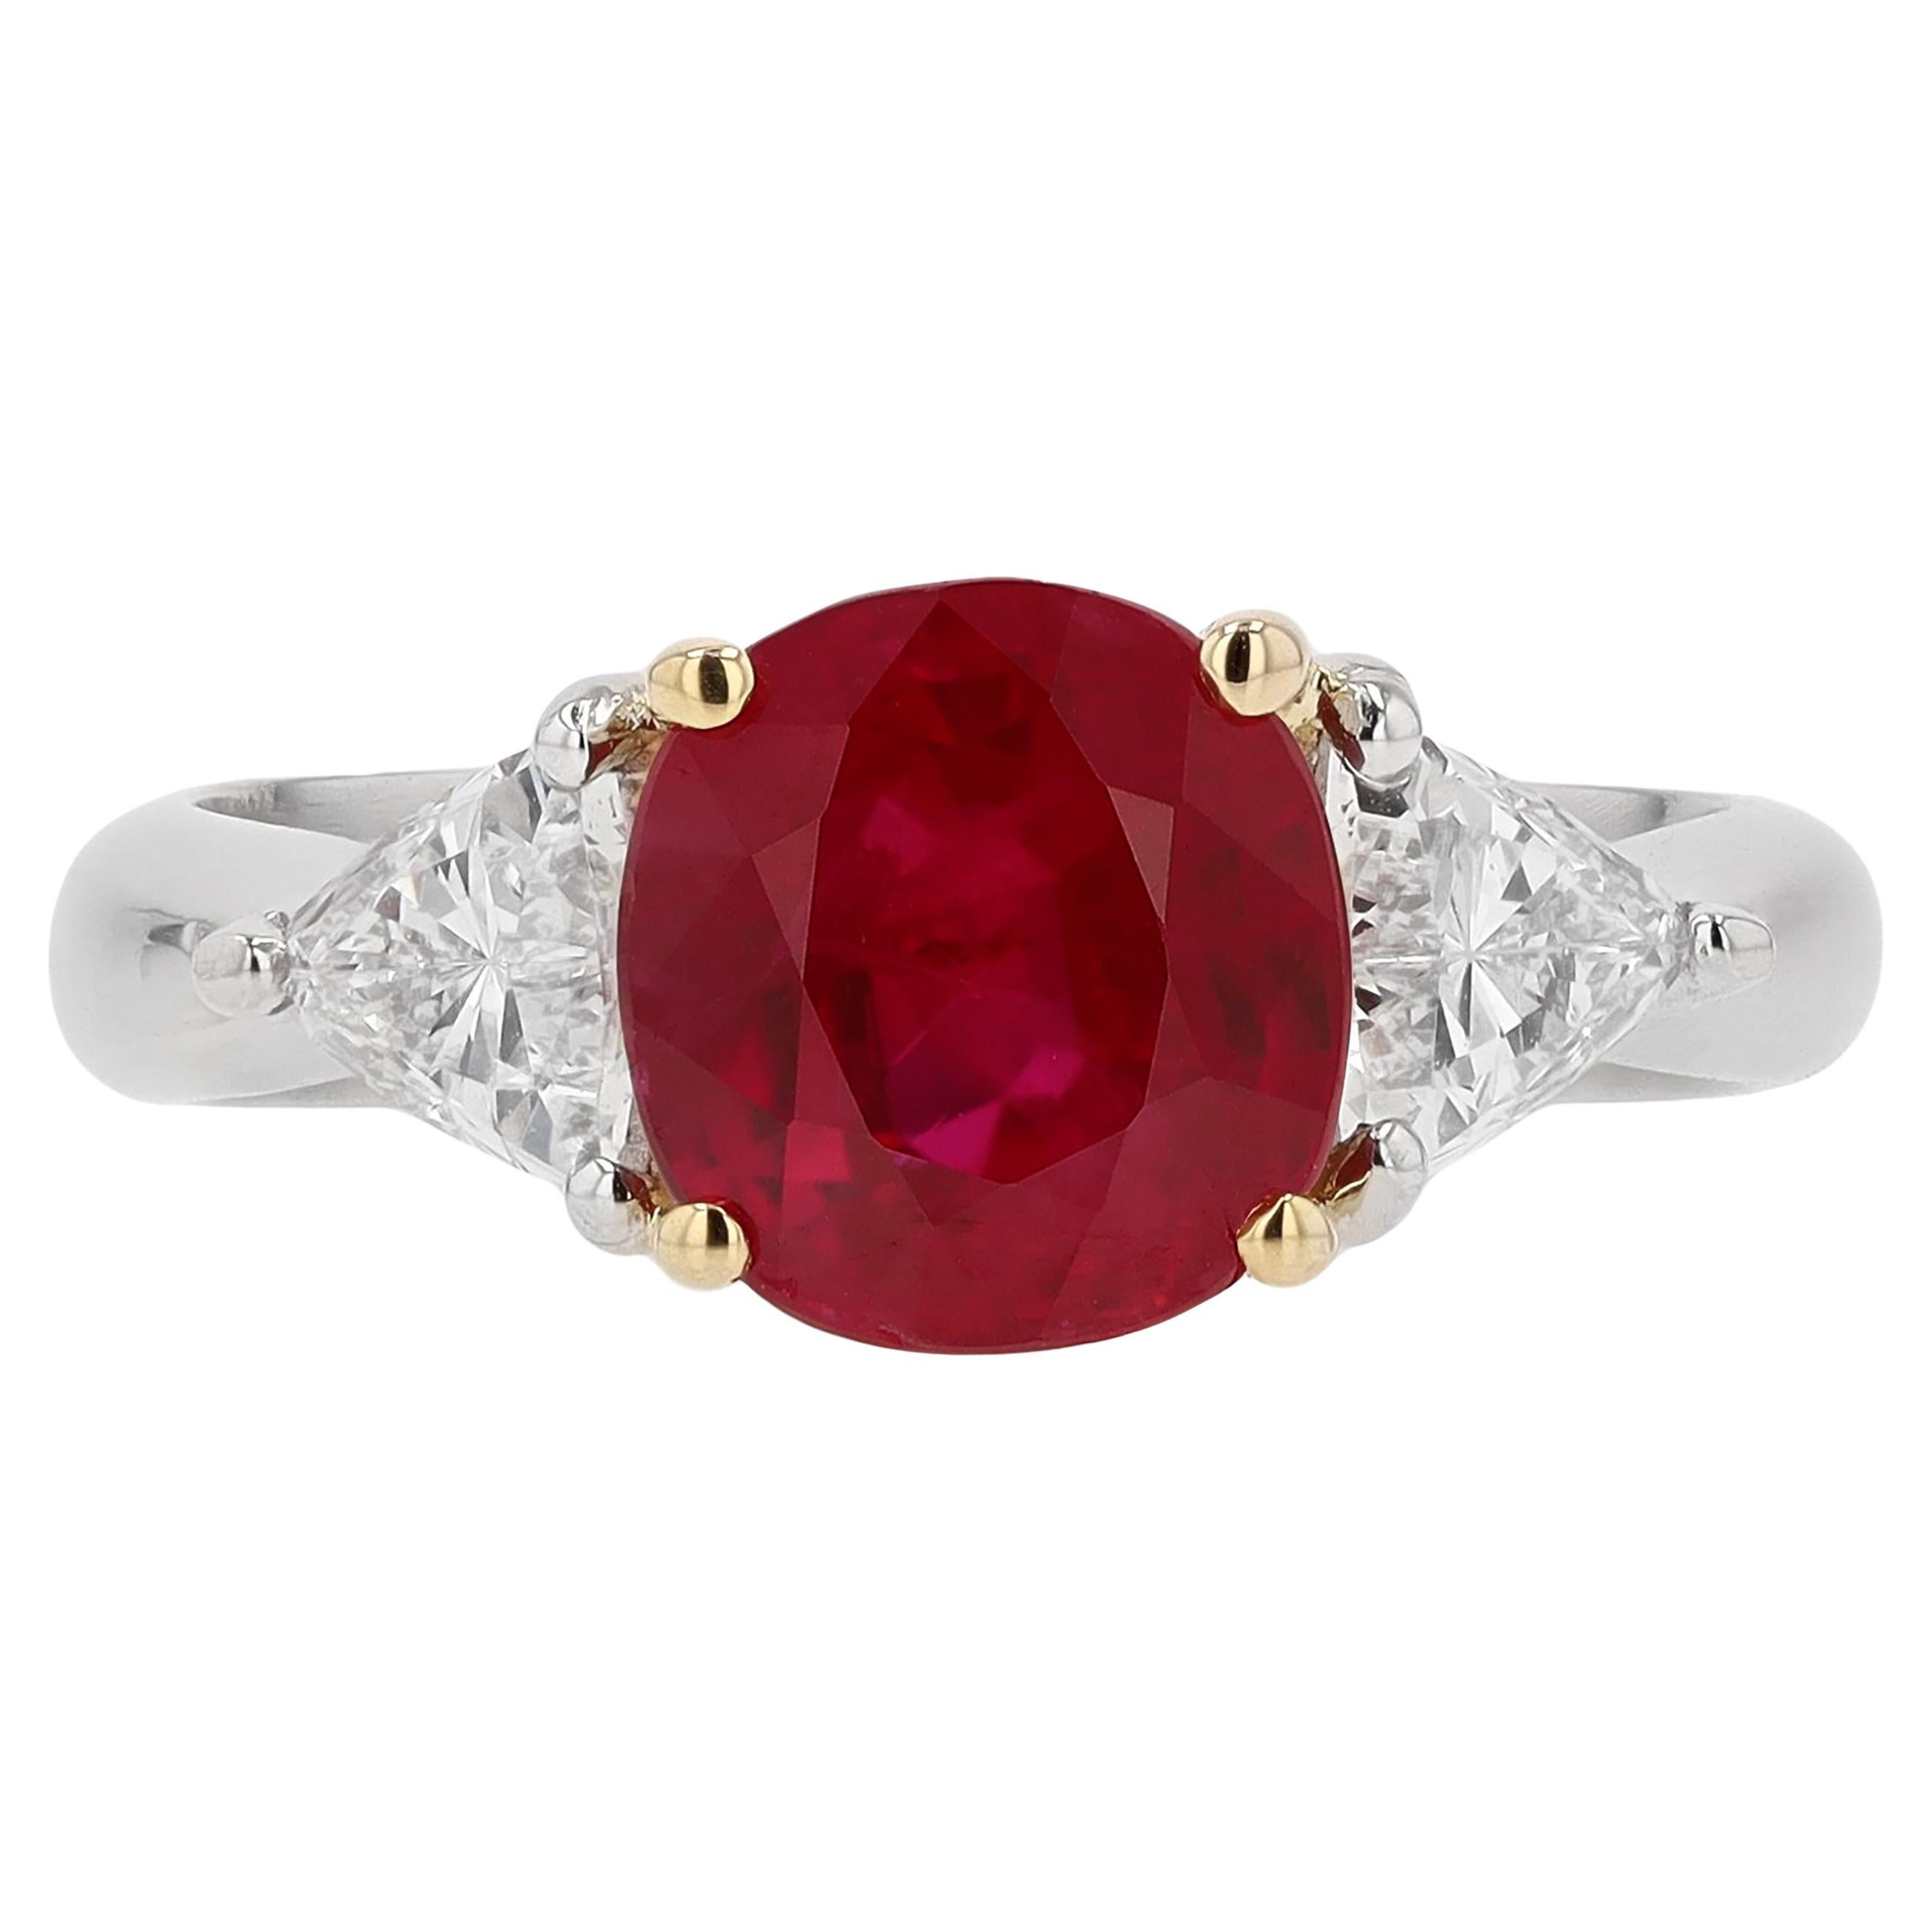 GIA Certified 3 Carat Pigeon Blood Burma Ruby Engagement Ring For Sale